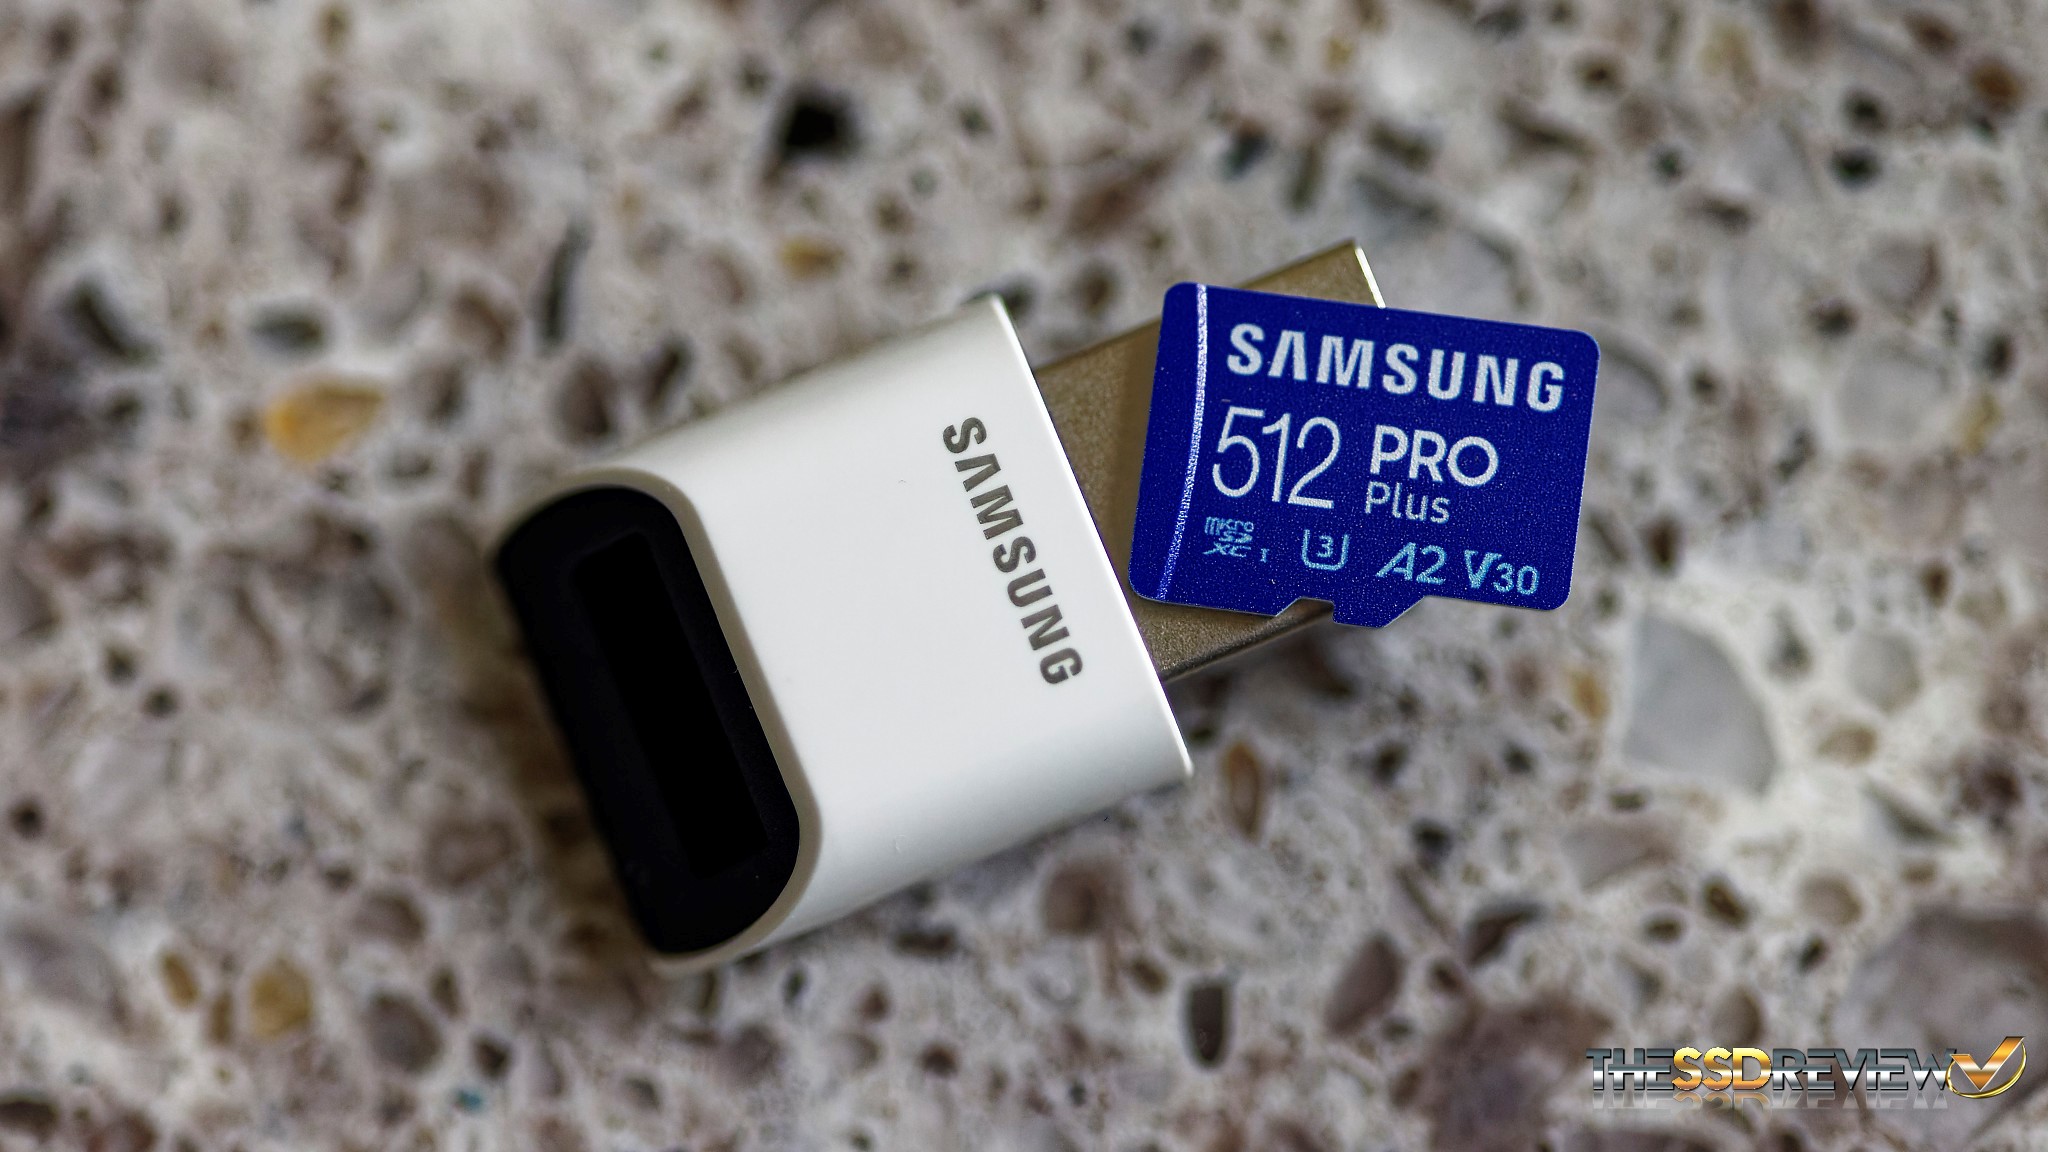 Samsung Pro Plus microSDXC Card and Card Reader Review